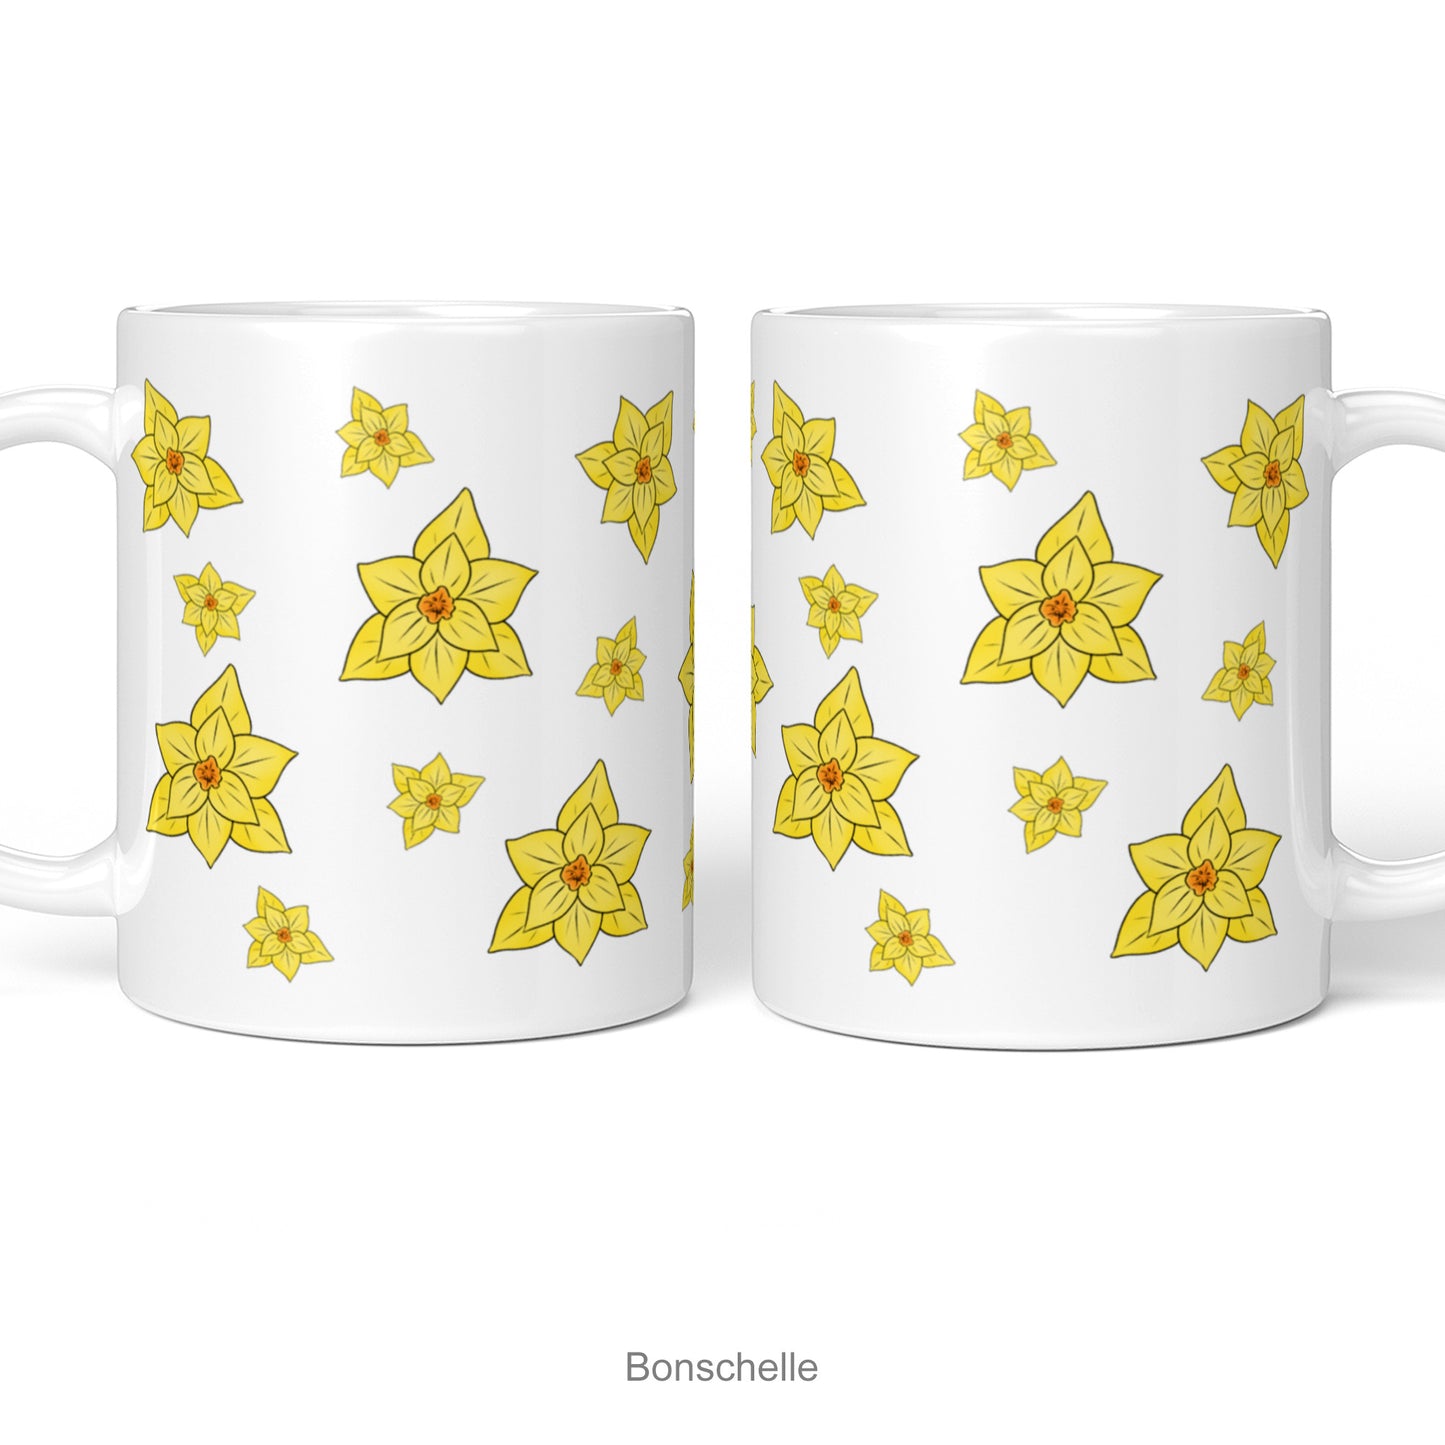 Lef and right side views of the Yellow Daffodils Spring Flowers Mug Gift